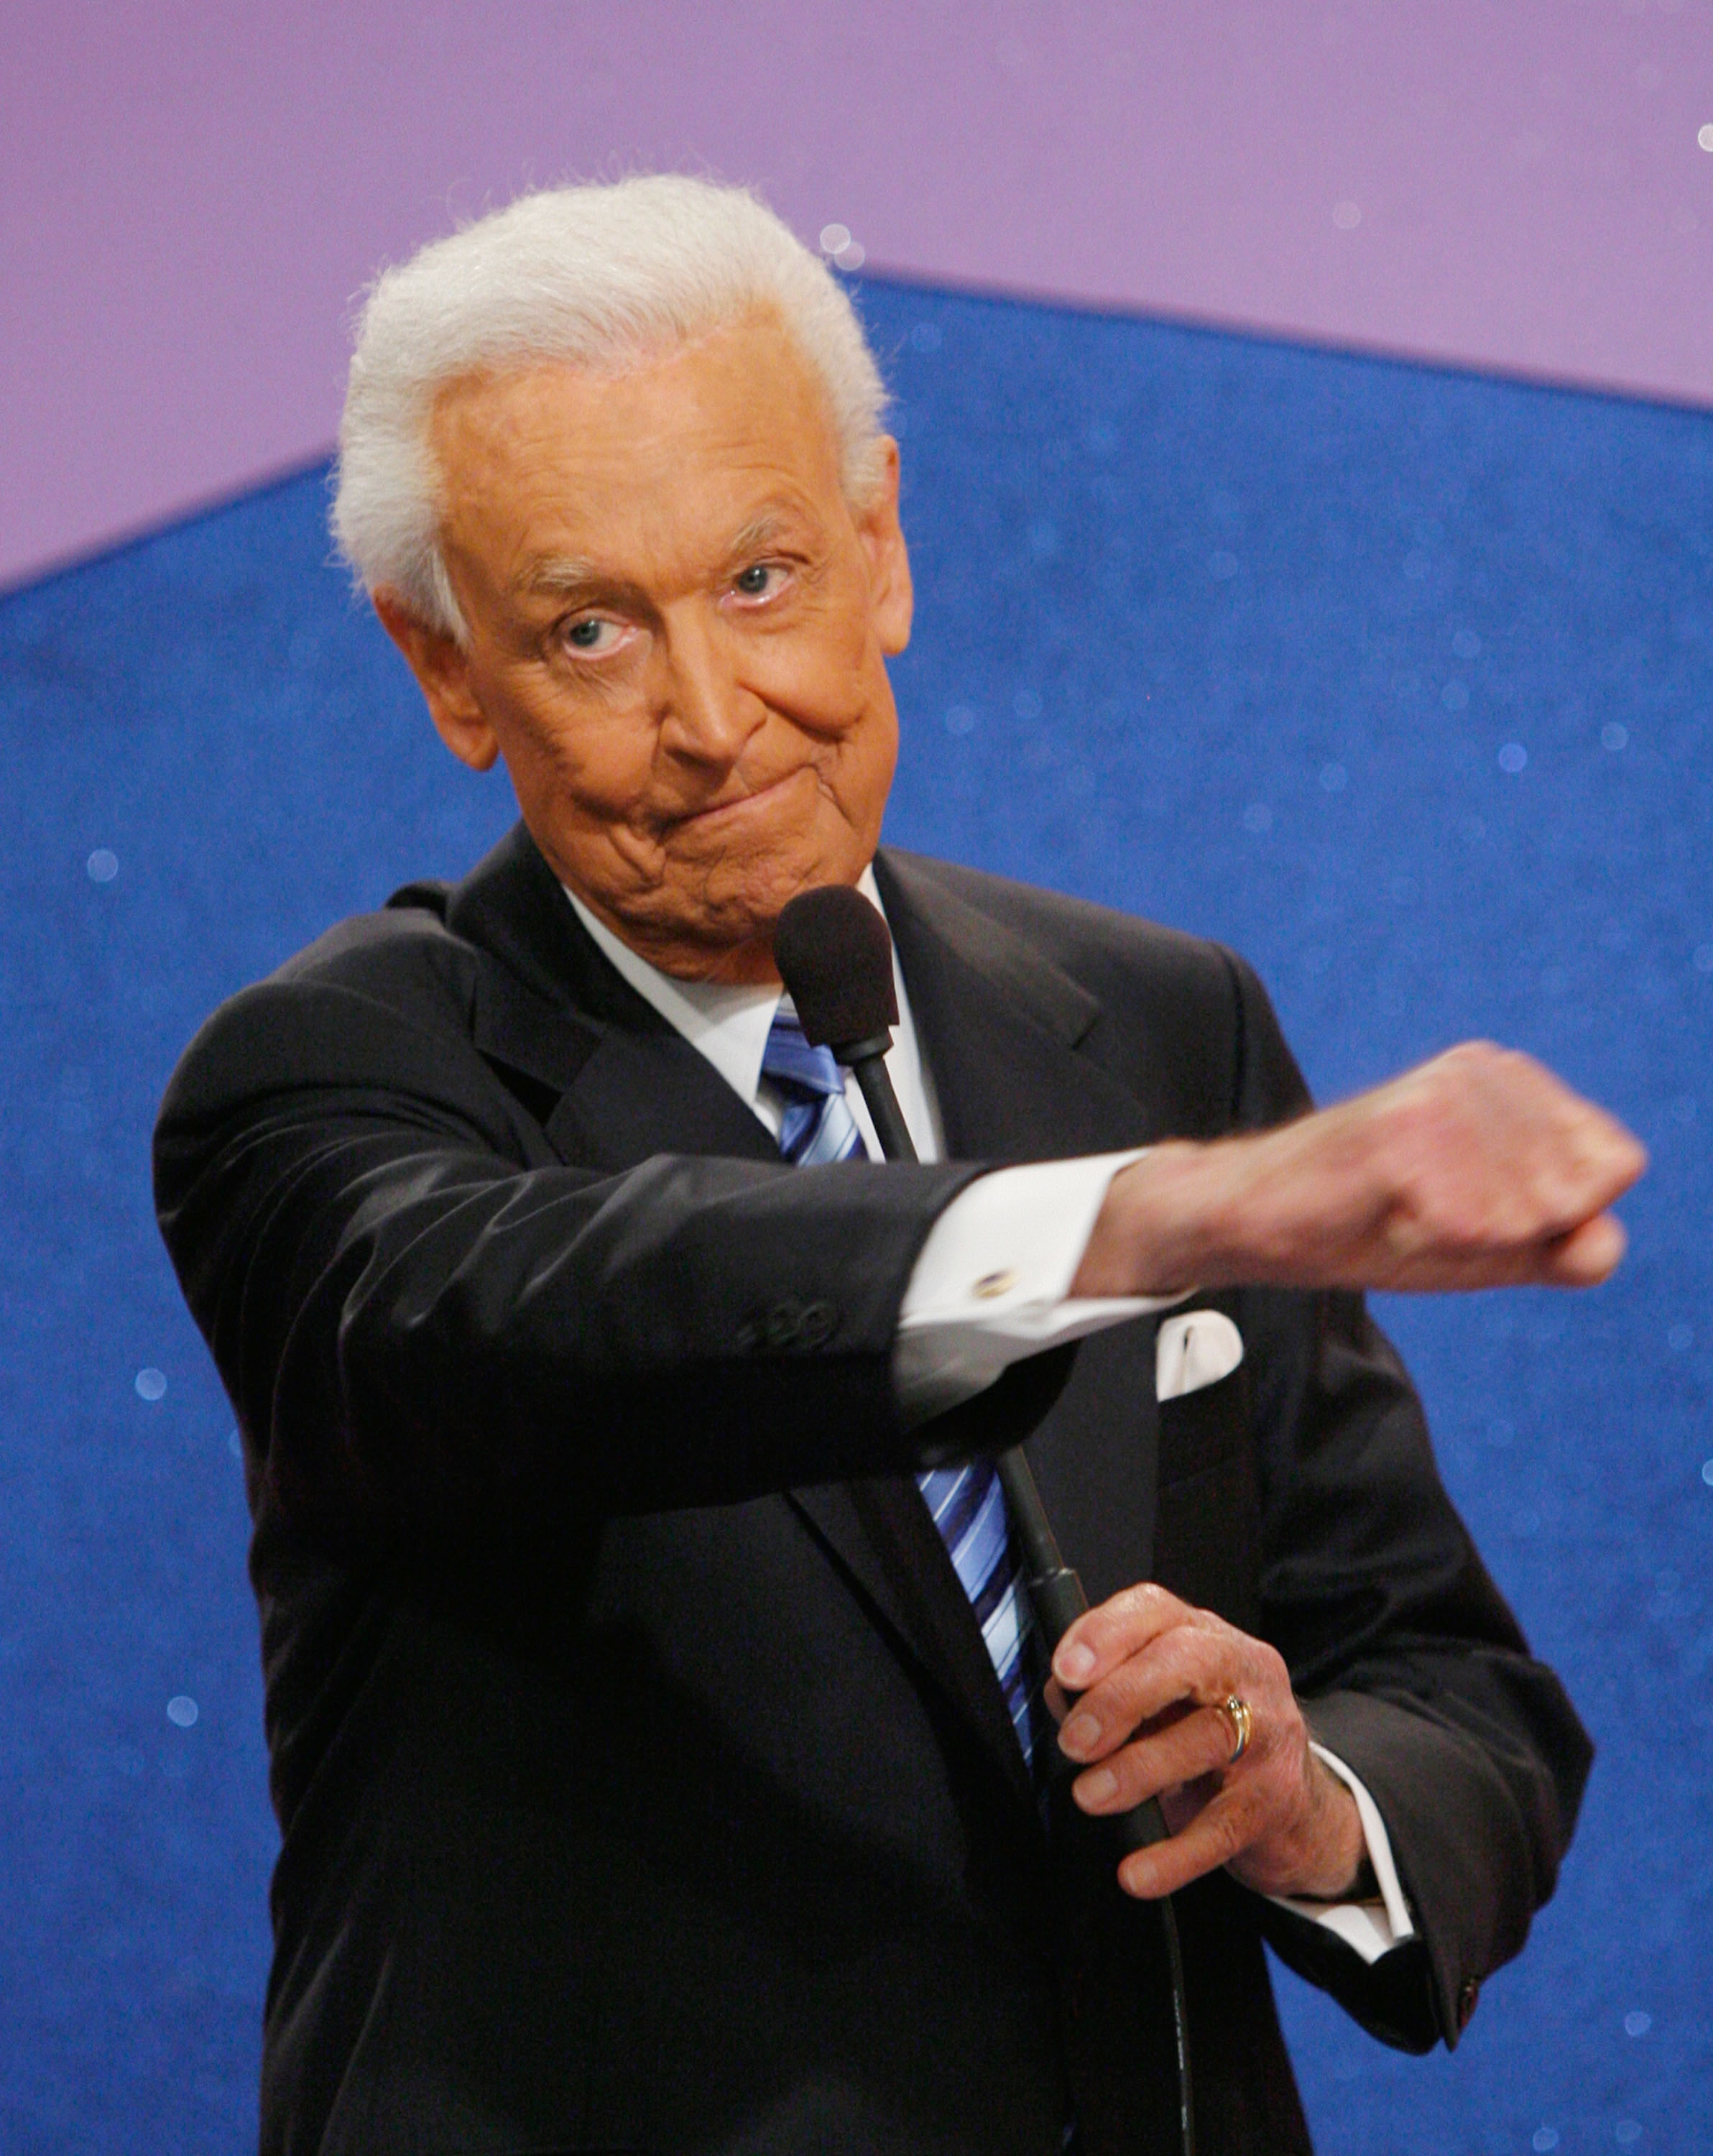 Bob Barker during his last taping of "The Price is Right" at the CBS television city studios on June 6, 2007, in Los Angeles, California | Source: Getty Images